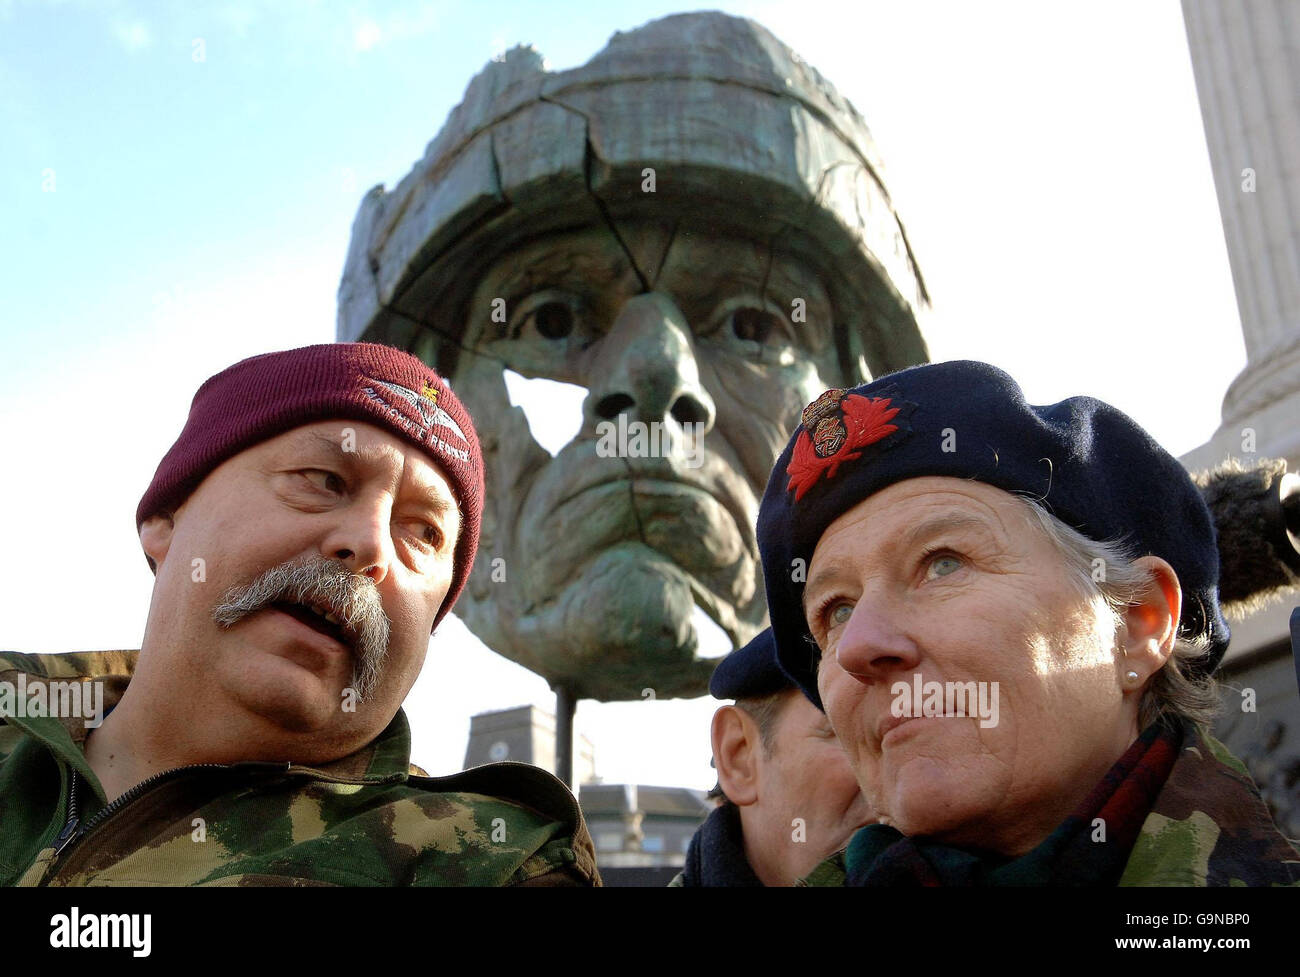 Denzil Connick (left), who lost his left leg on Mount Longdon in the Falkland Islands, talks to Nicci Pugh, a naval nurse who treated his injuries on the Hospital Ship Uganda in 1982, in front of a giant soldier's head in Trafalgar Square, central London during an event organised by the National Gulf Veterans and Families Association. Stock Photo